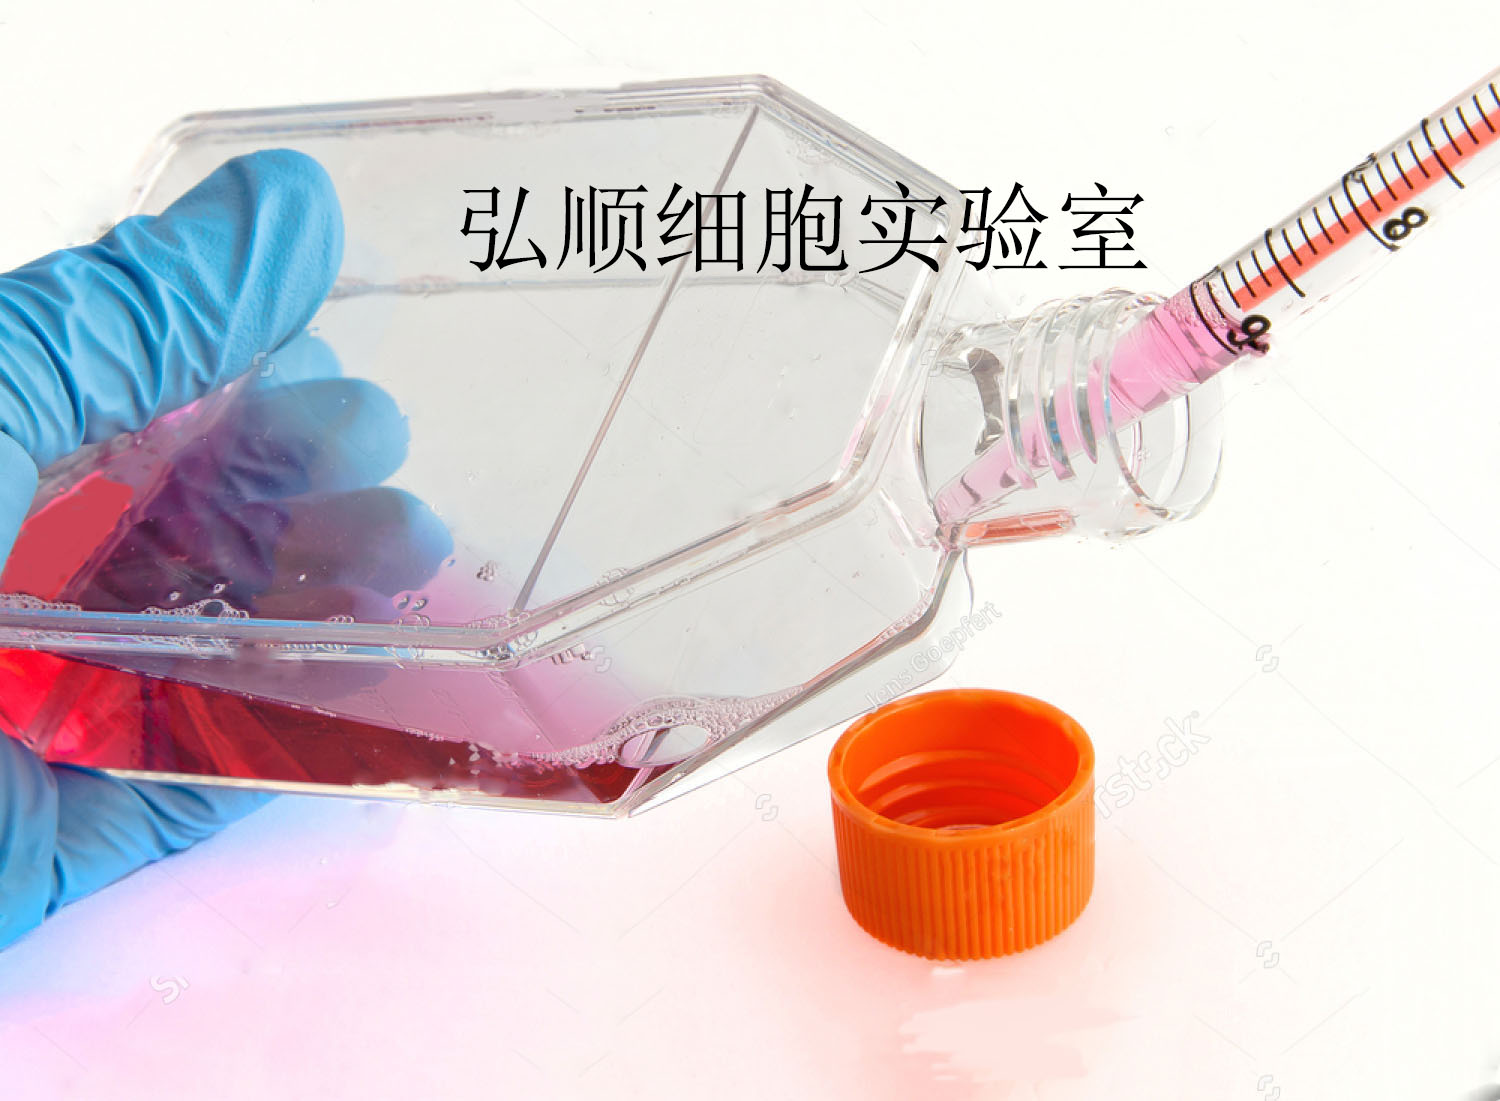 KYSE-450 Cell Line|人食管癌细胞,KYSE-450 Cell Line